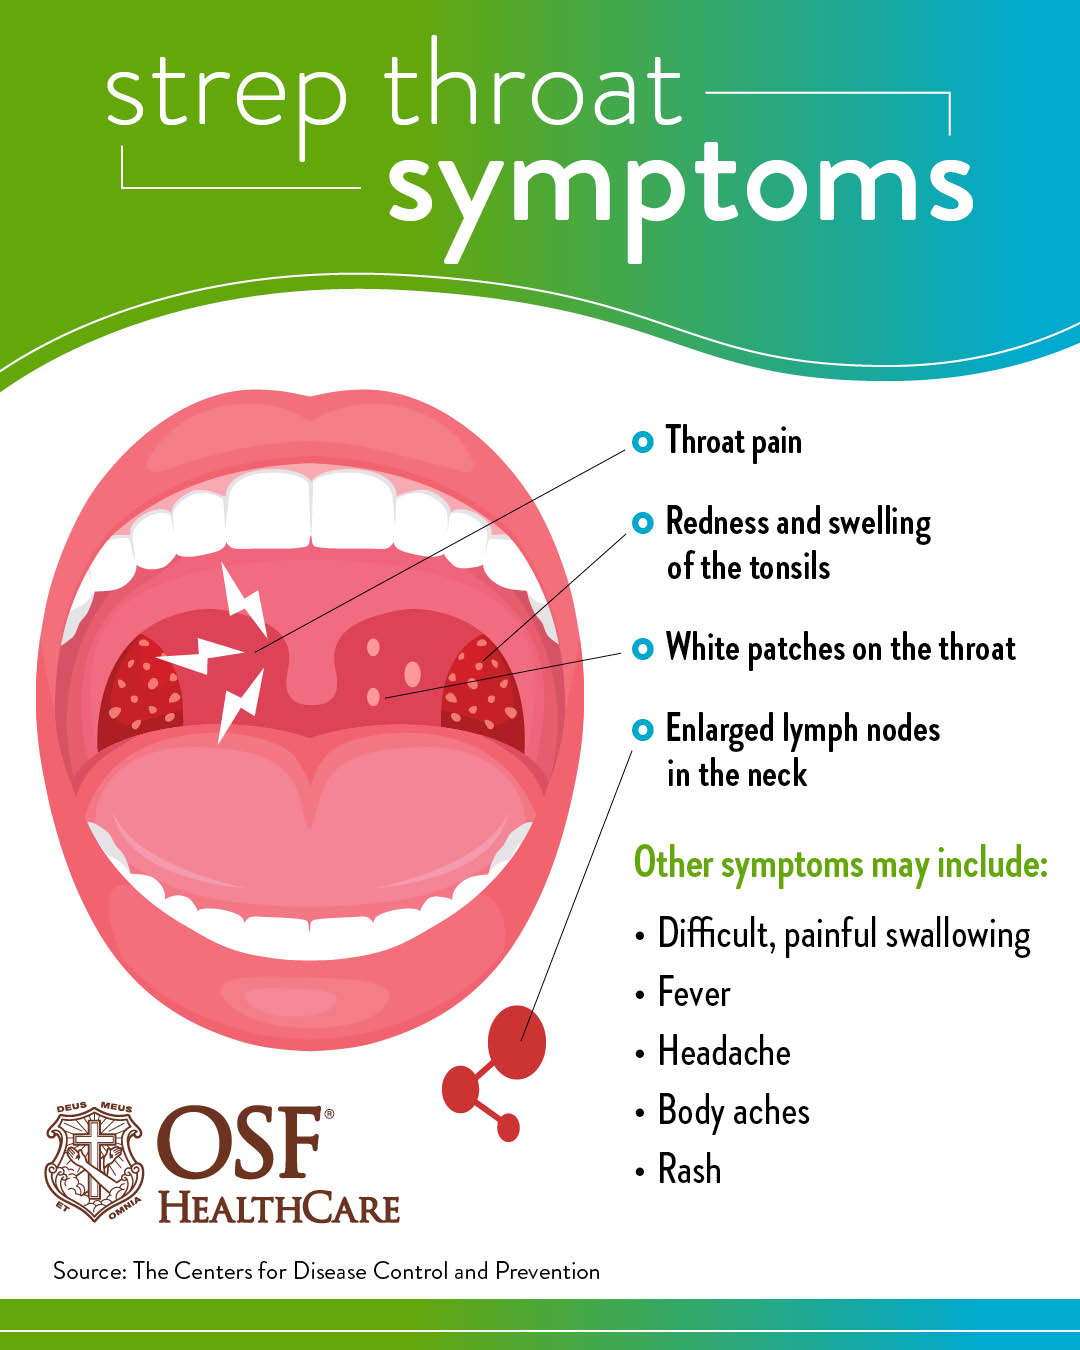 What To Know About Strep Throat Osf Healthcare